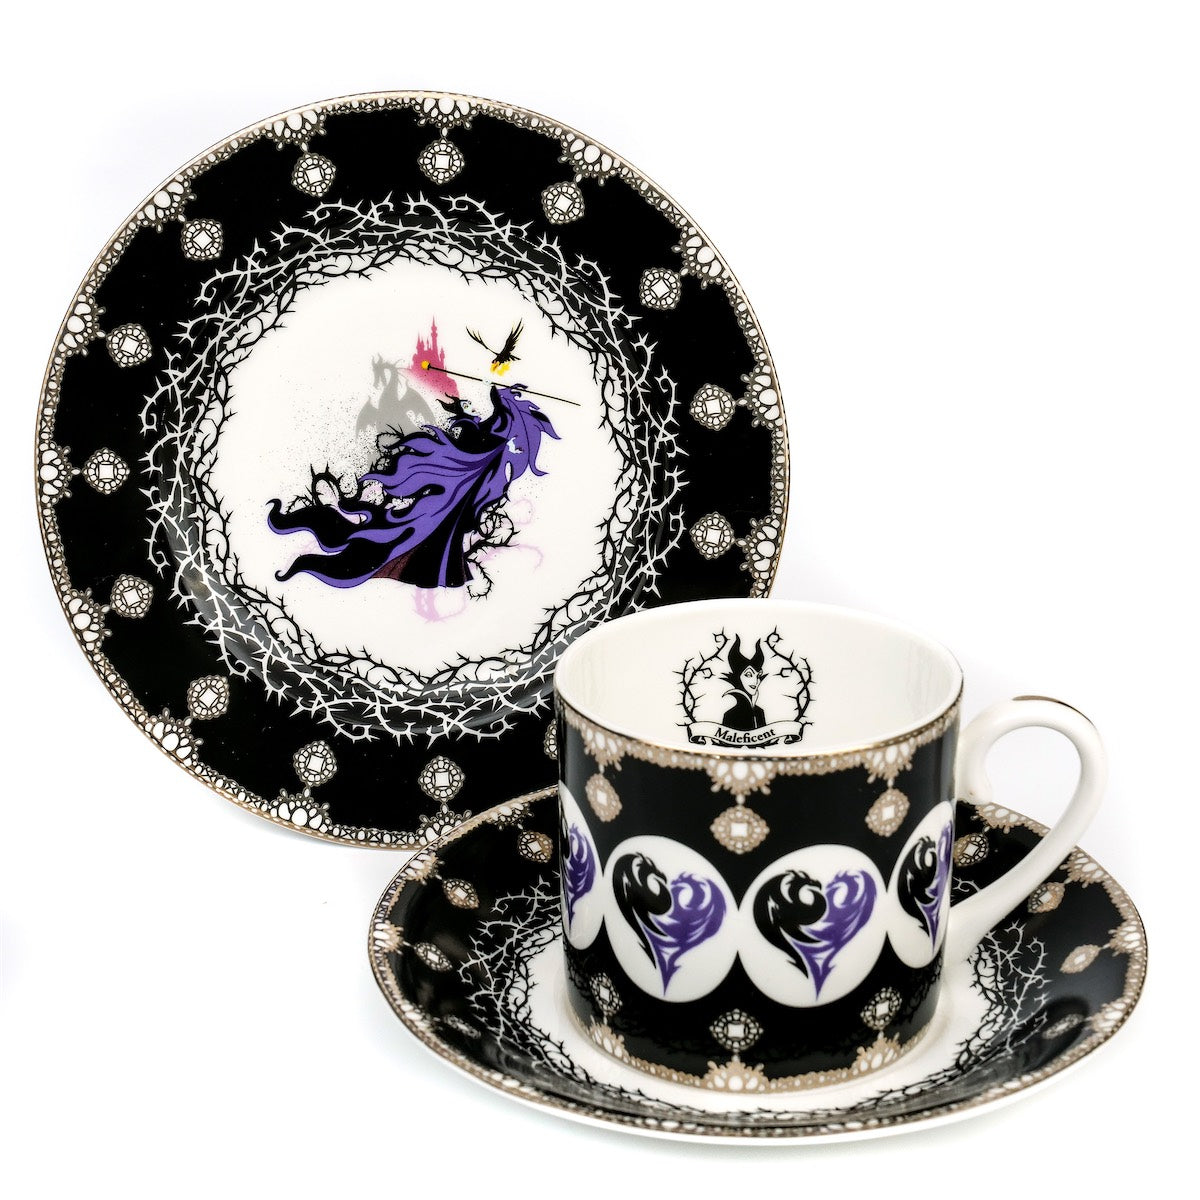 Maleficent Bone China Cup And Saucer